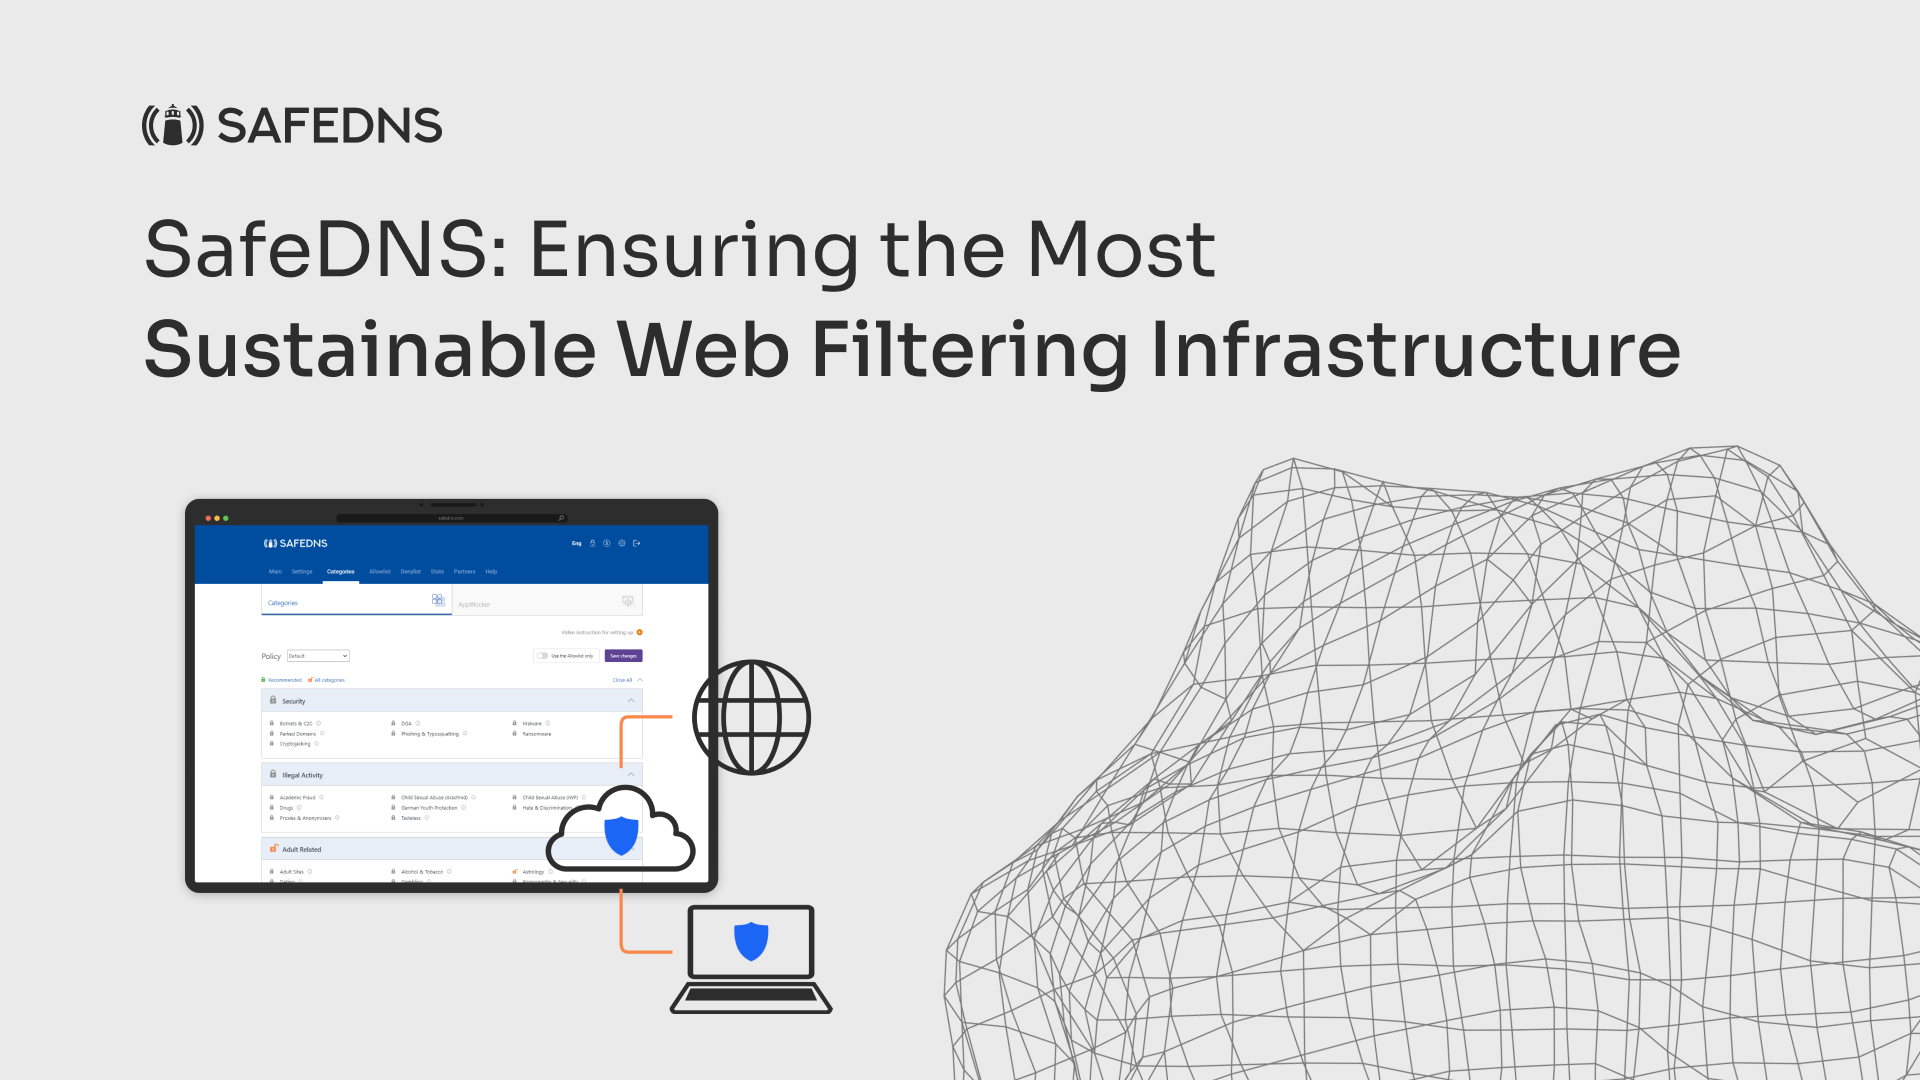 SafeDNS: Ensuring the Most Sustainable Web Filtering Infrastructure